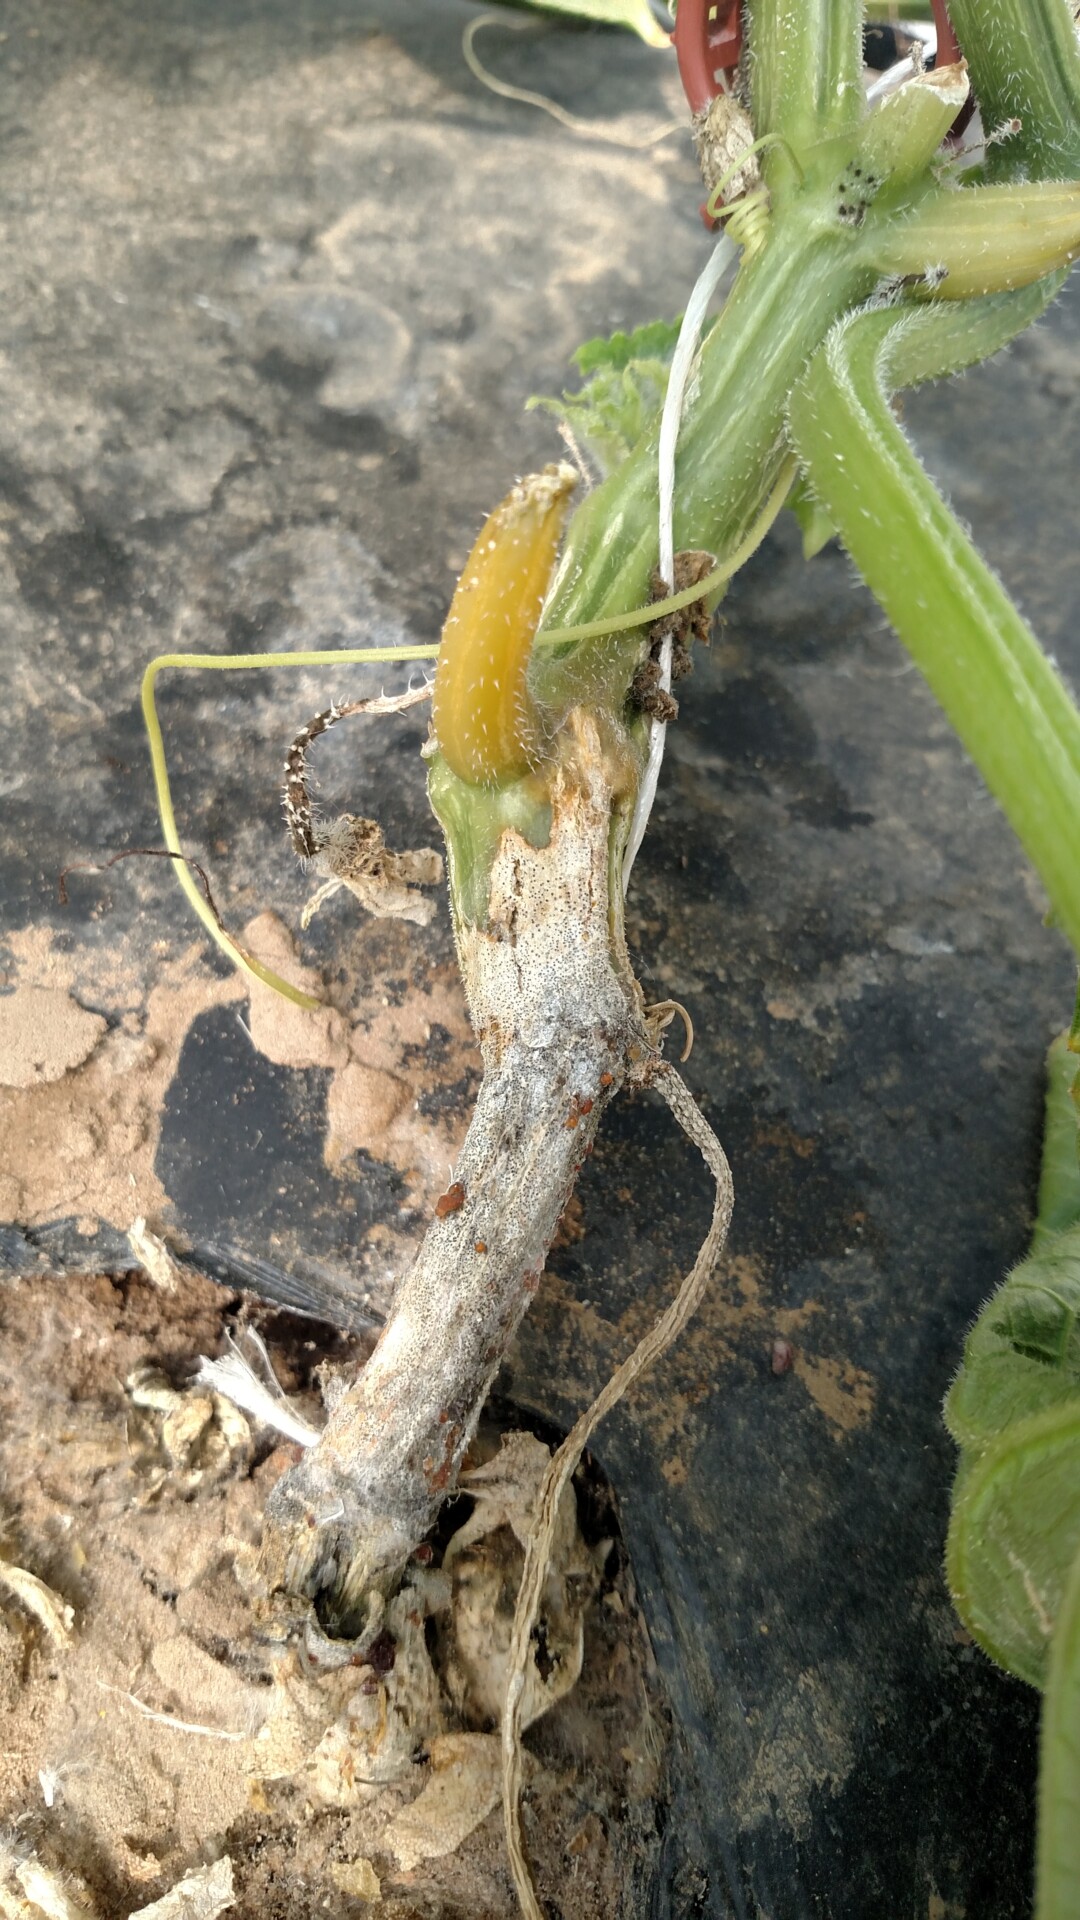 Charcoal rot of cucumber. Light gray lesion on them with micro-sclerotia shown.